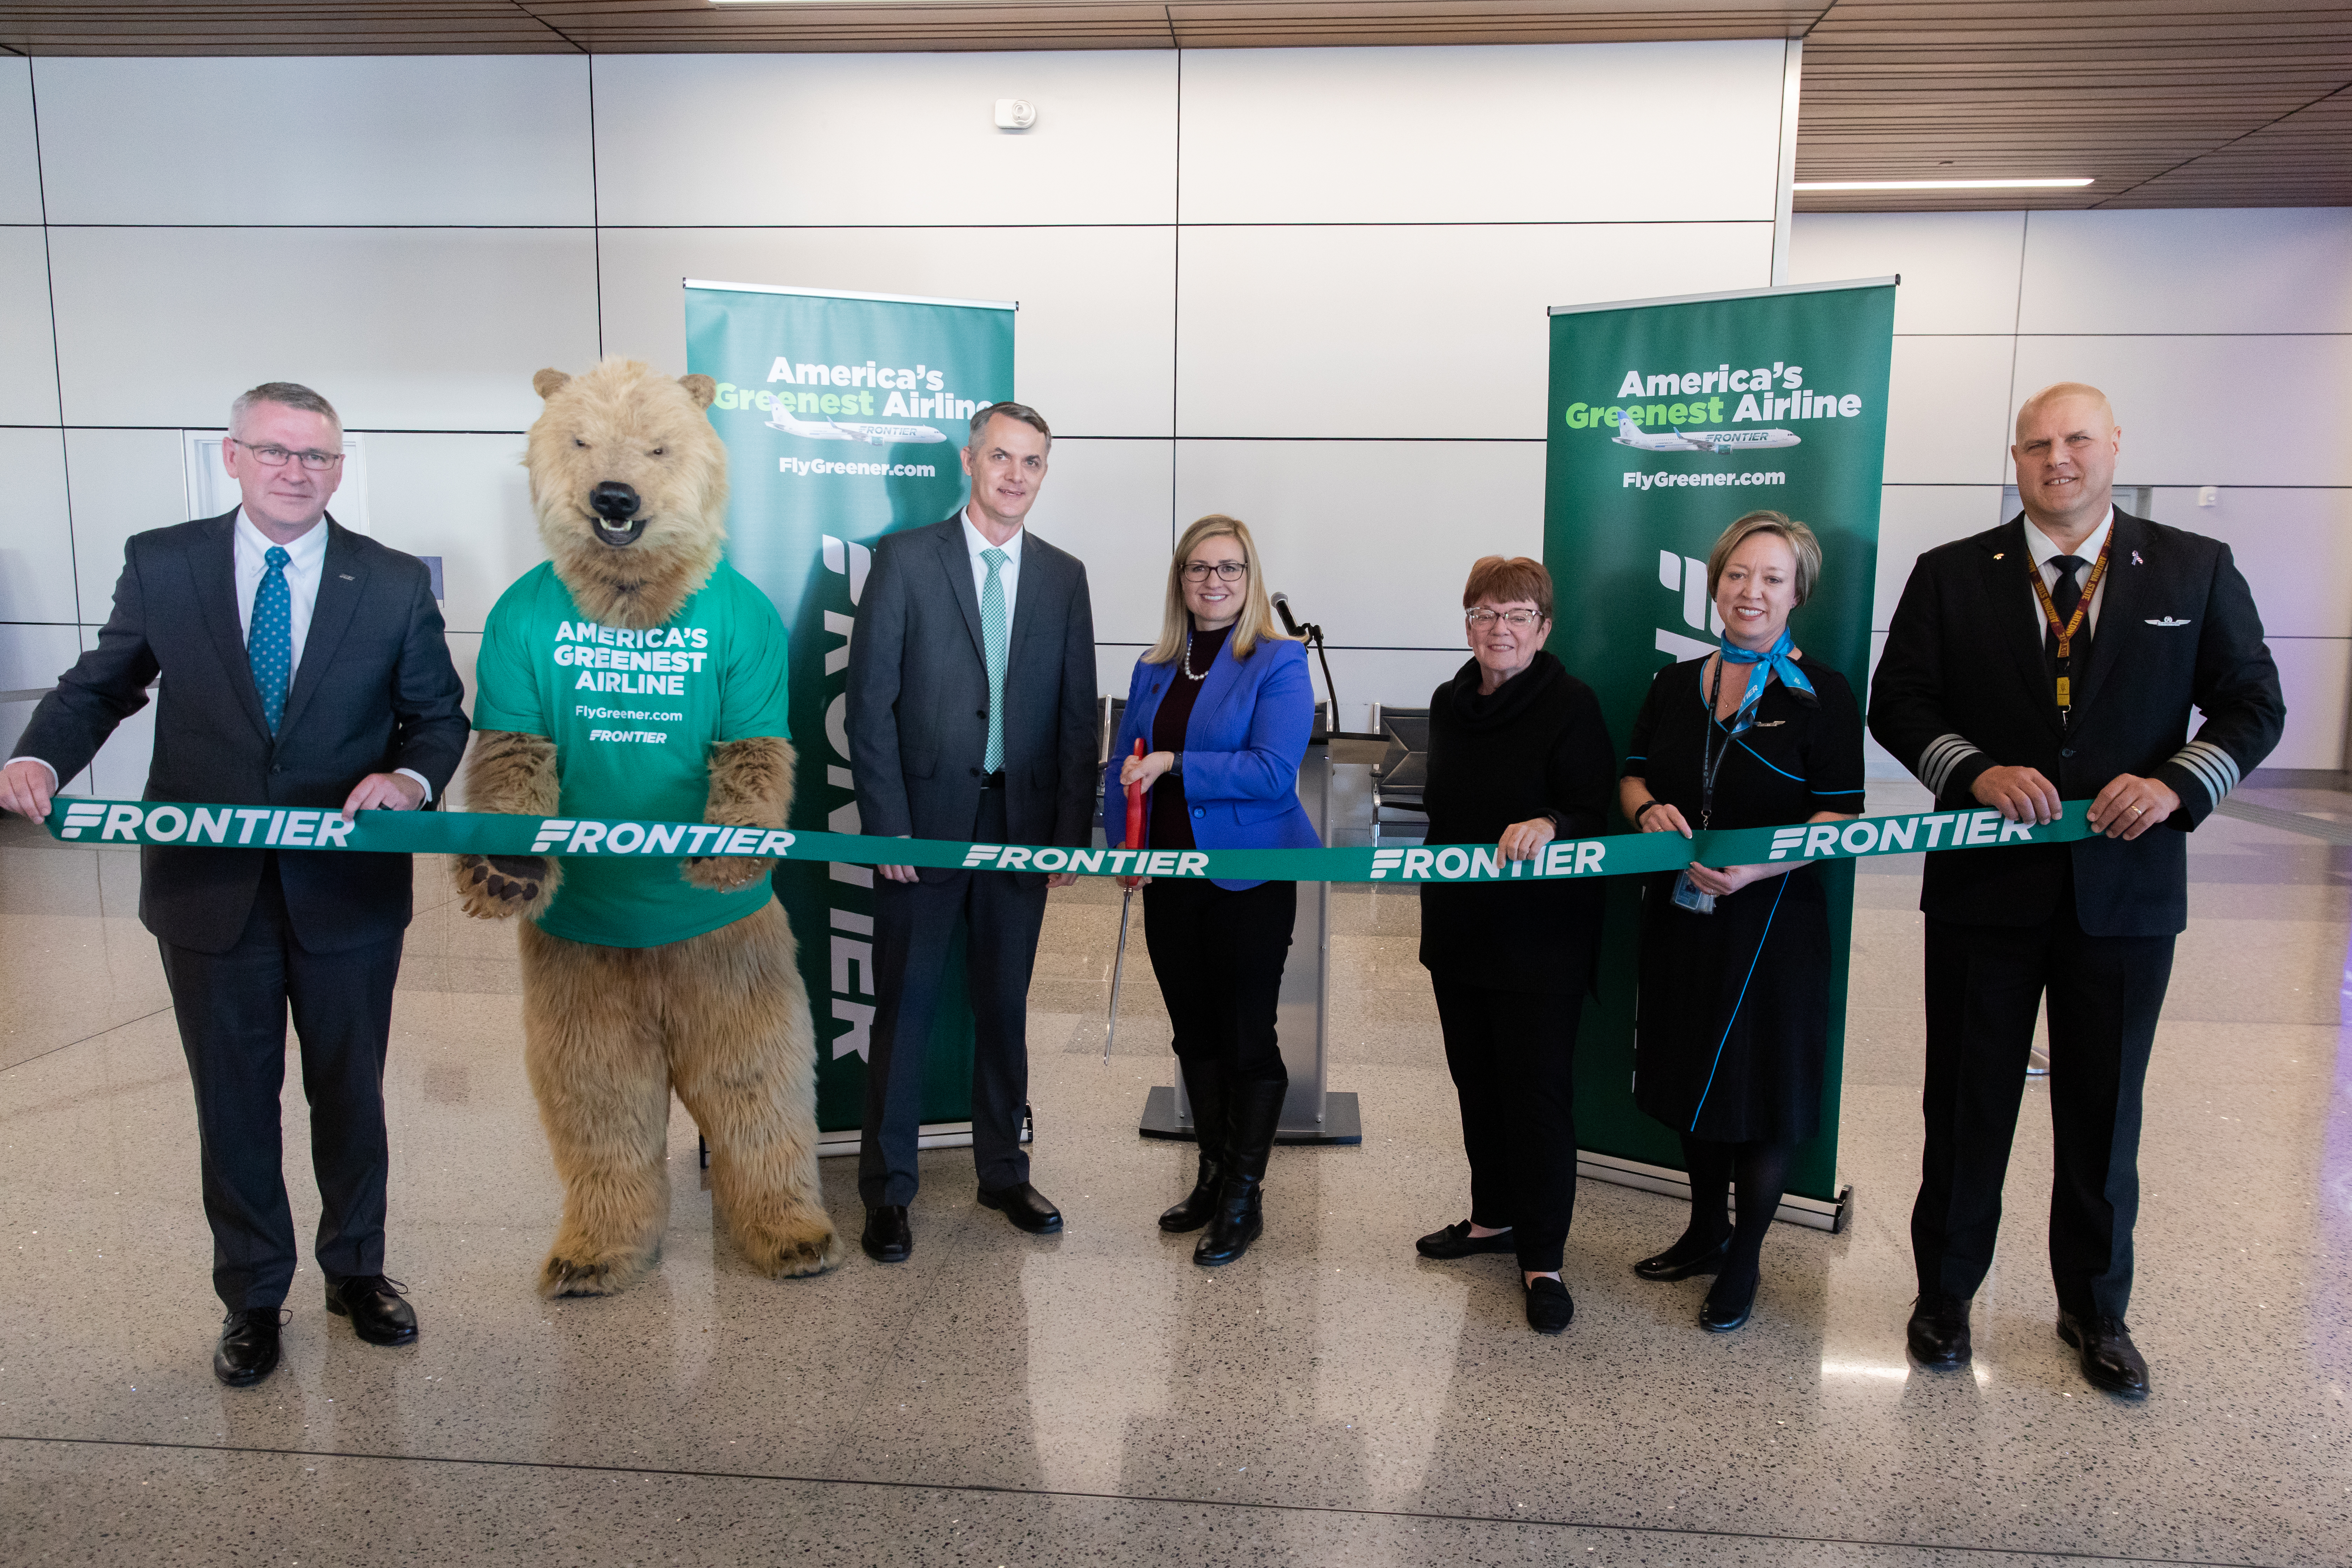 Phoenix Mayor Kate Gallego joined by Aviation Department executives and Frontier Airline executive to cut ceremonial ribbon.